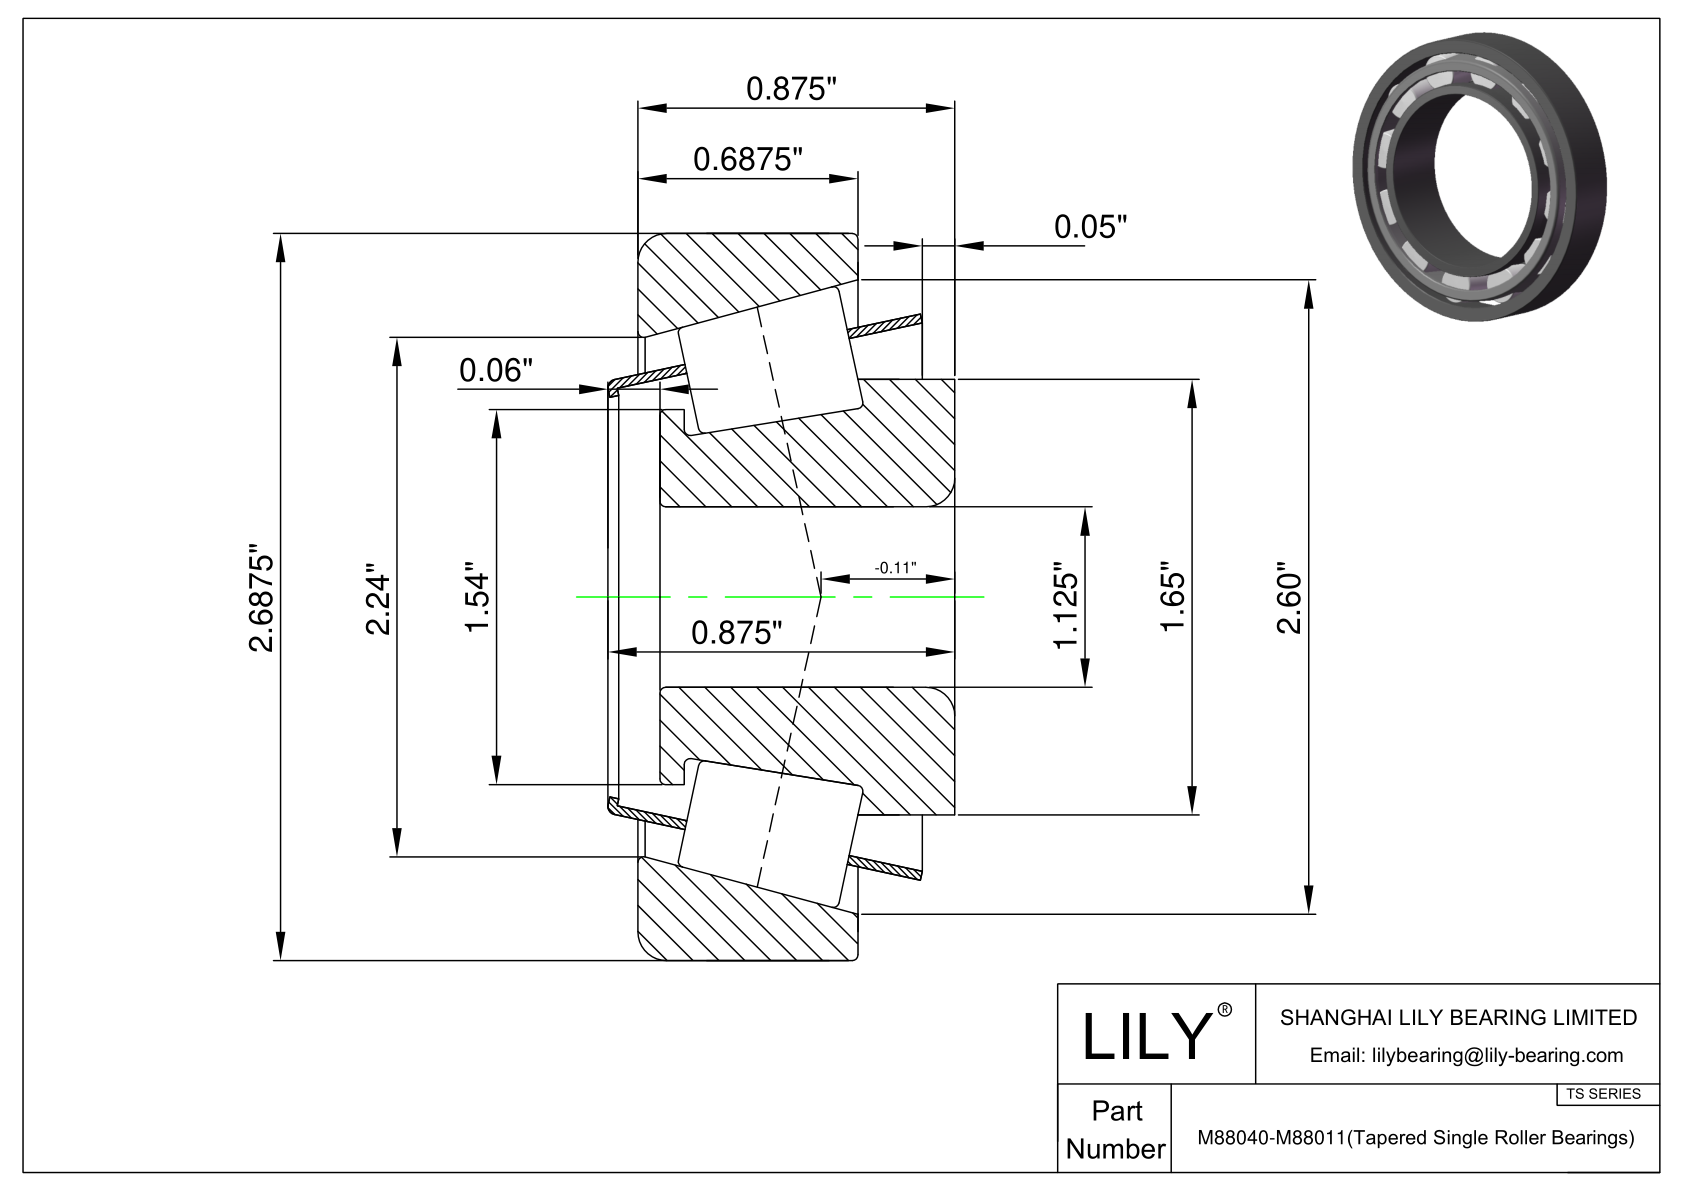 M88040-M88011 TS (Tapered Single Roller Bearings) (Imperial) cad drawing